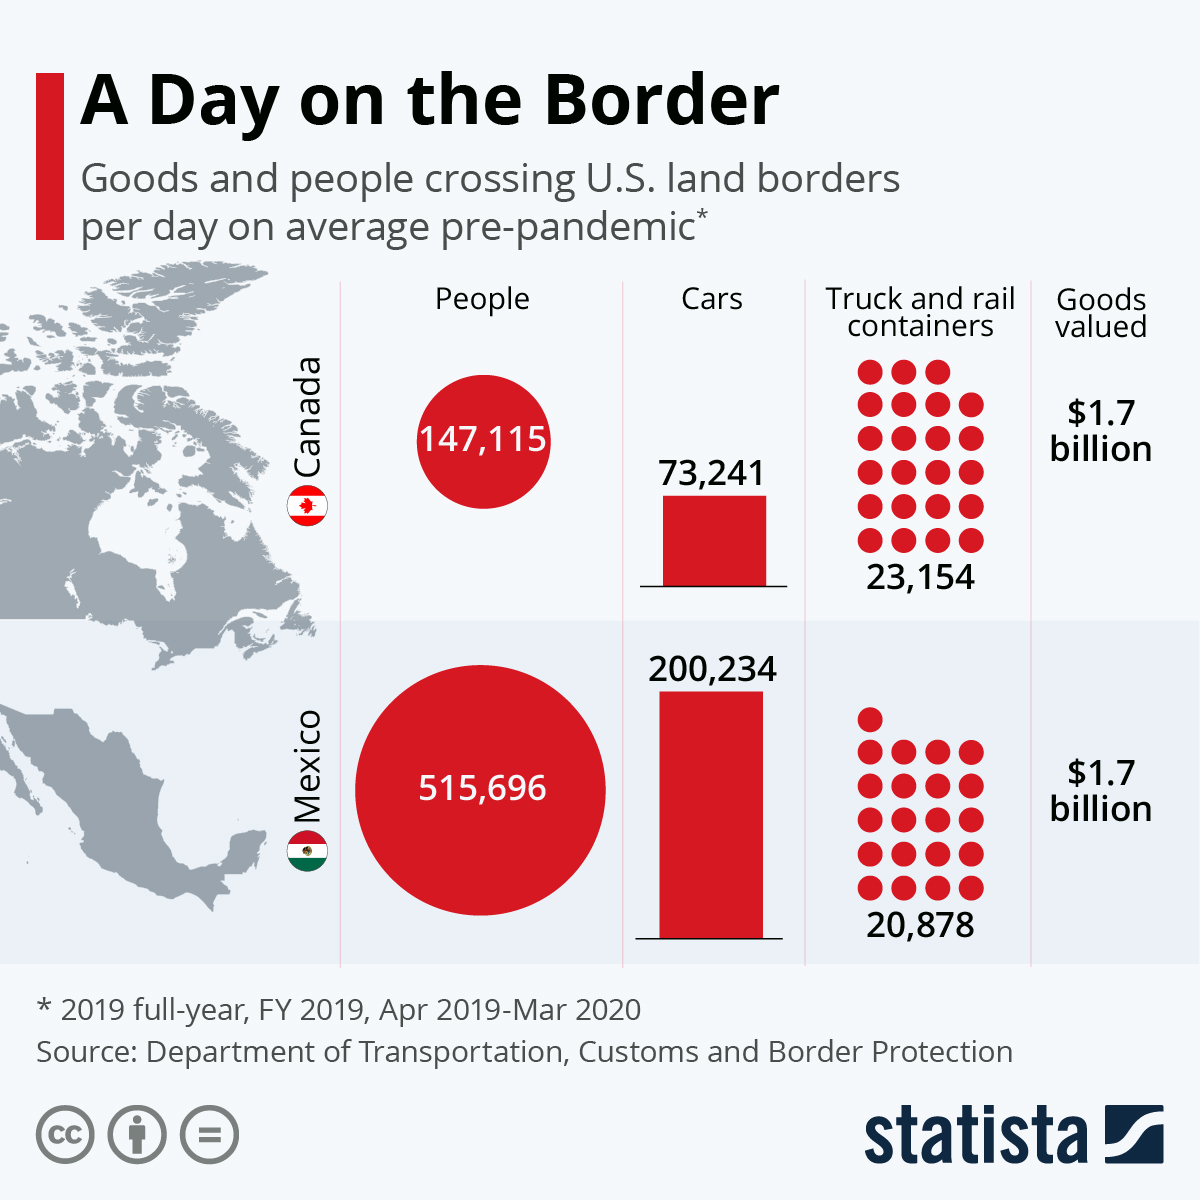 A Day on the Border